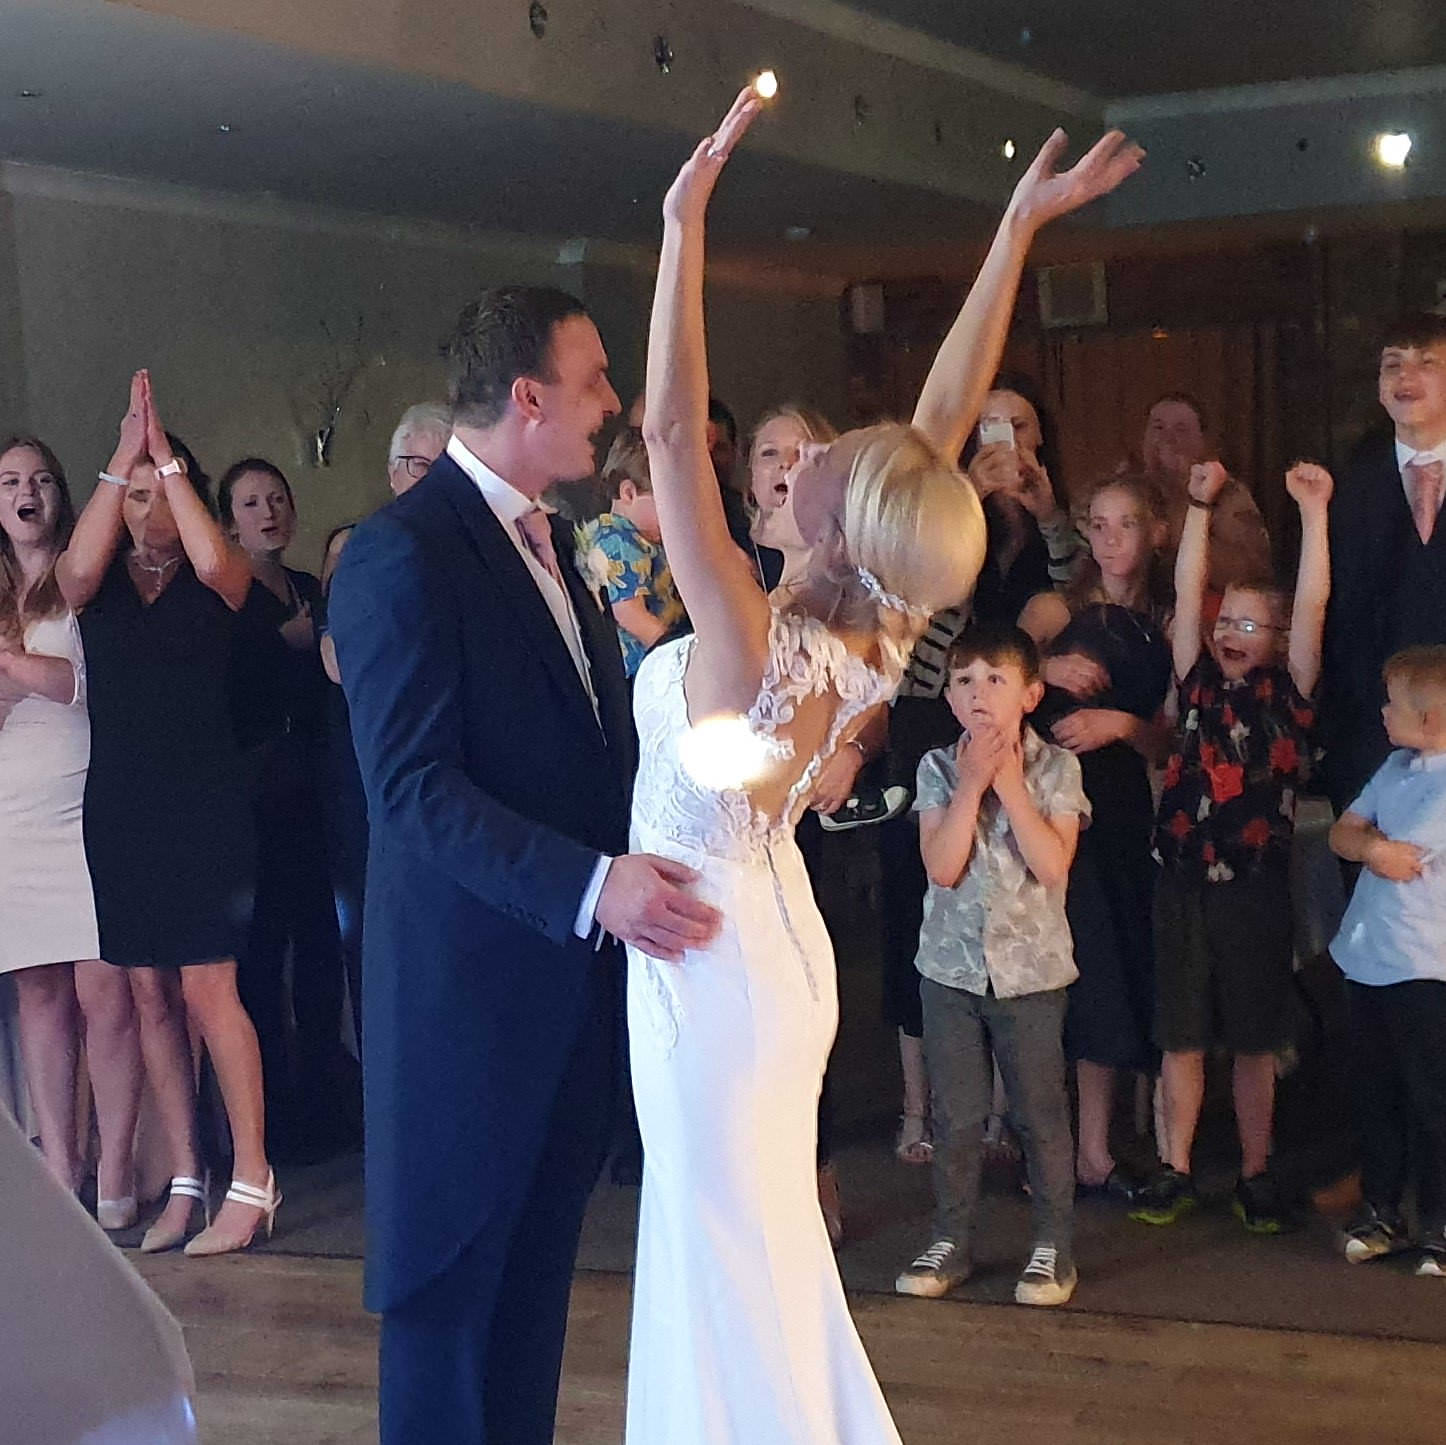 Bride and groom with her arms victoriously punching air above head during first dance at wedding disco near Bristol.